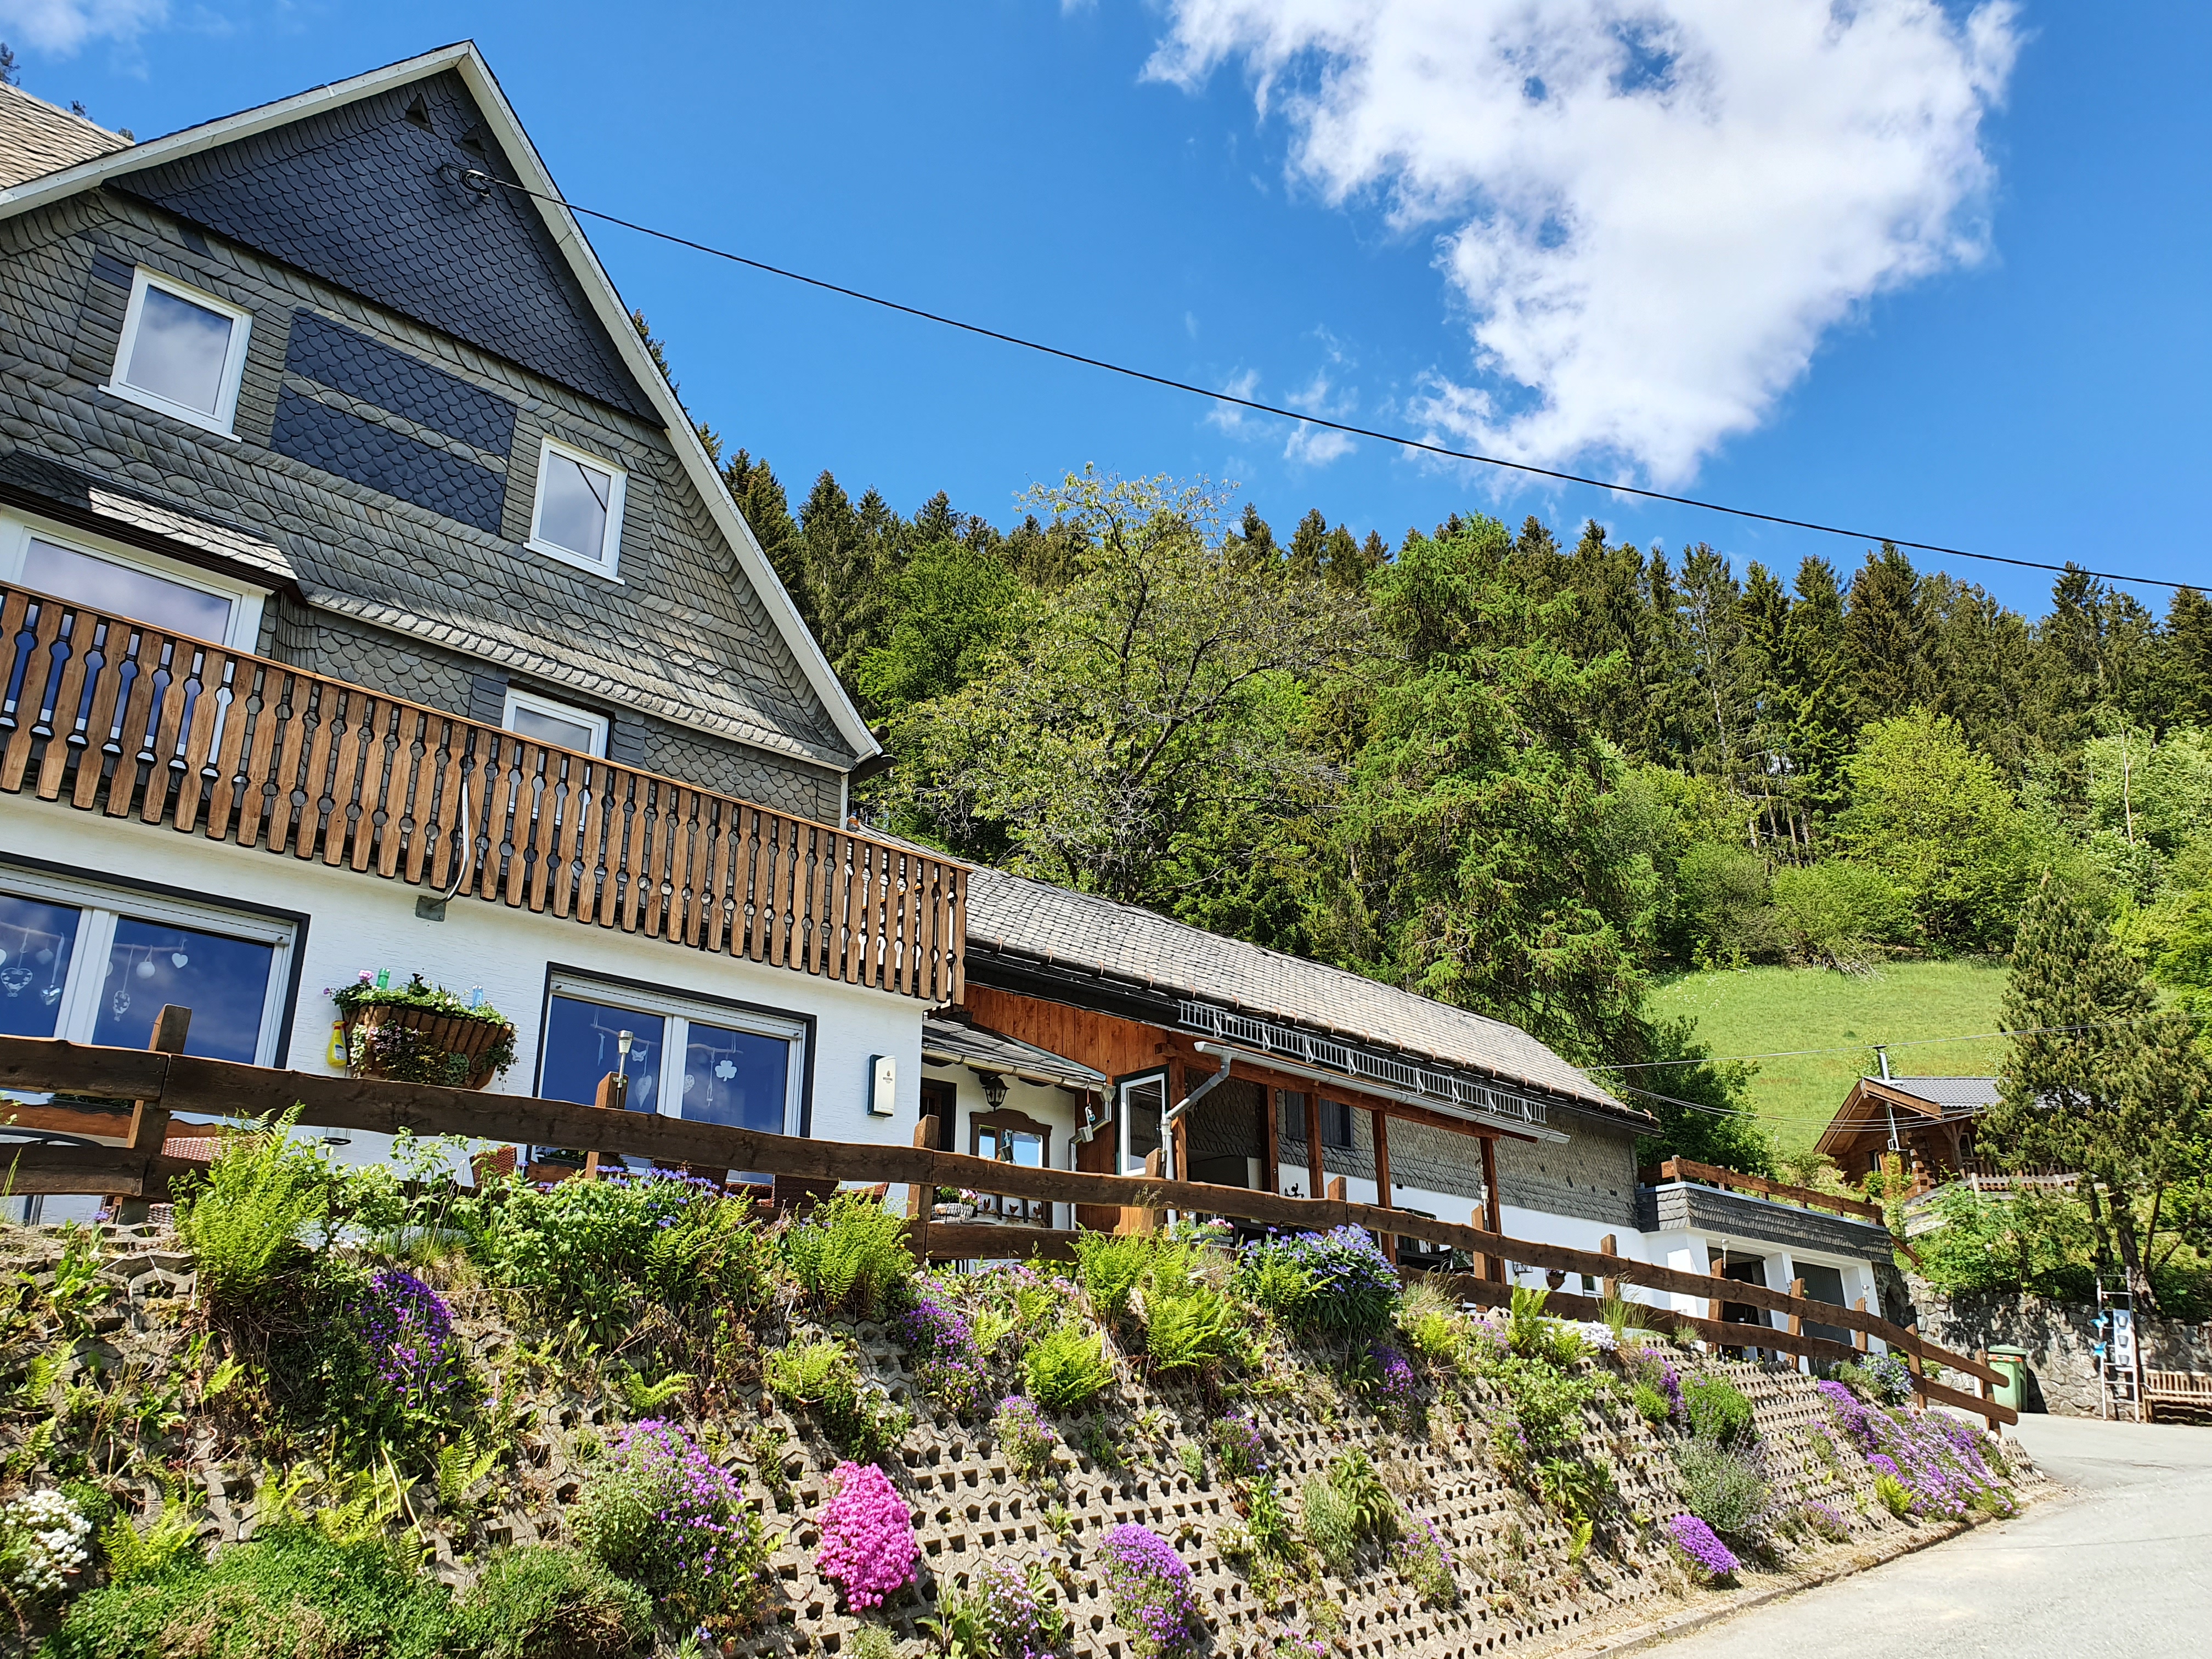 Landgasthof Nesselbach <br/>50.00 ew <br/> <a href='http://vakantieoplossing.nl/outpage/?id=1d6a2c35051ffc74e3b67cce57c8bfe6' target='_blank'>View Details</a>